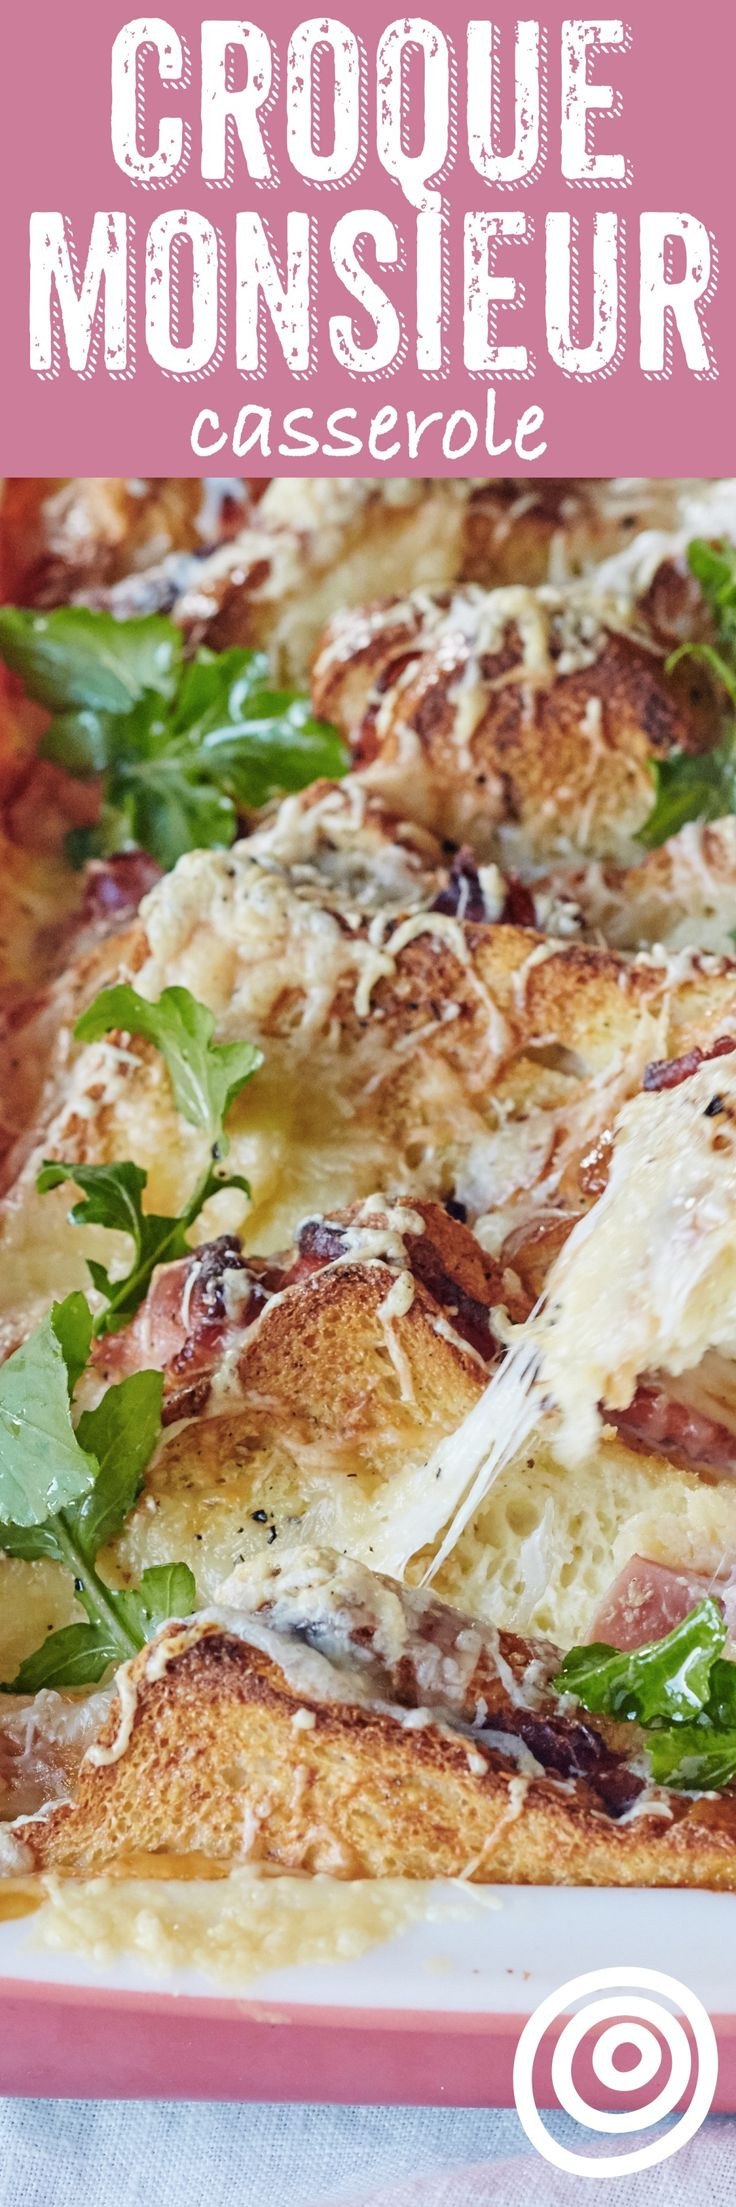 Make Ahead Dinners For A Crowd
 Baked Croque Monsieur Casserole – Wel e to my blog